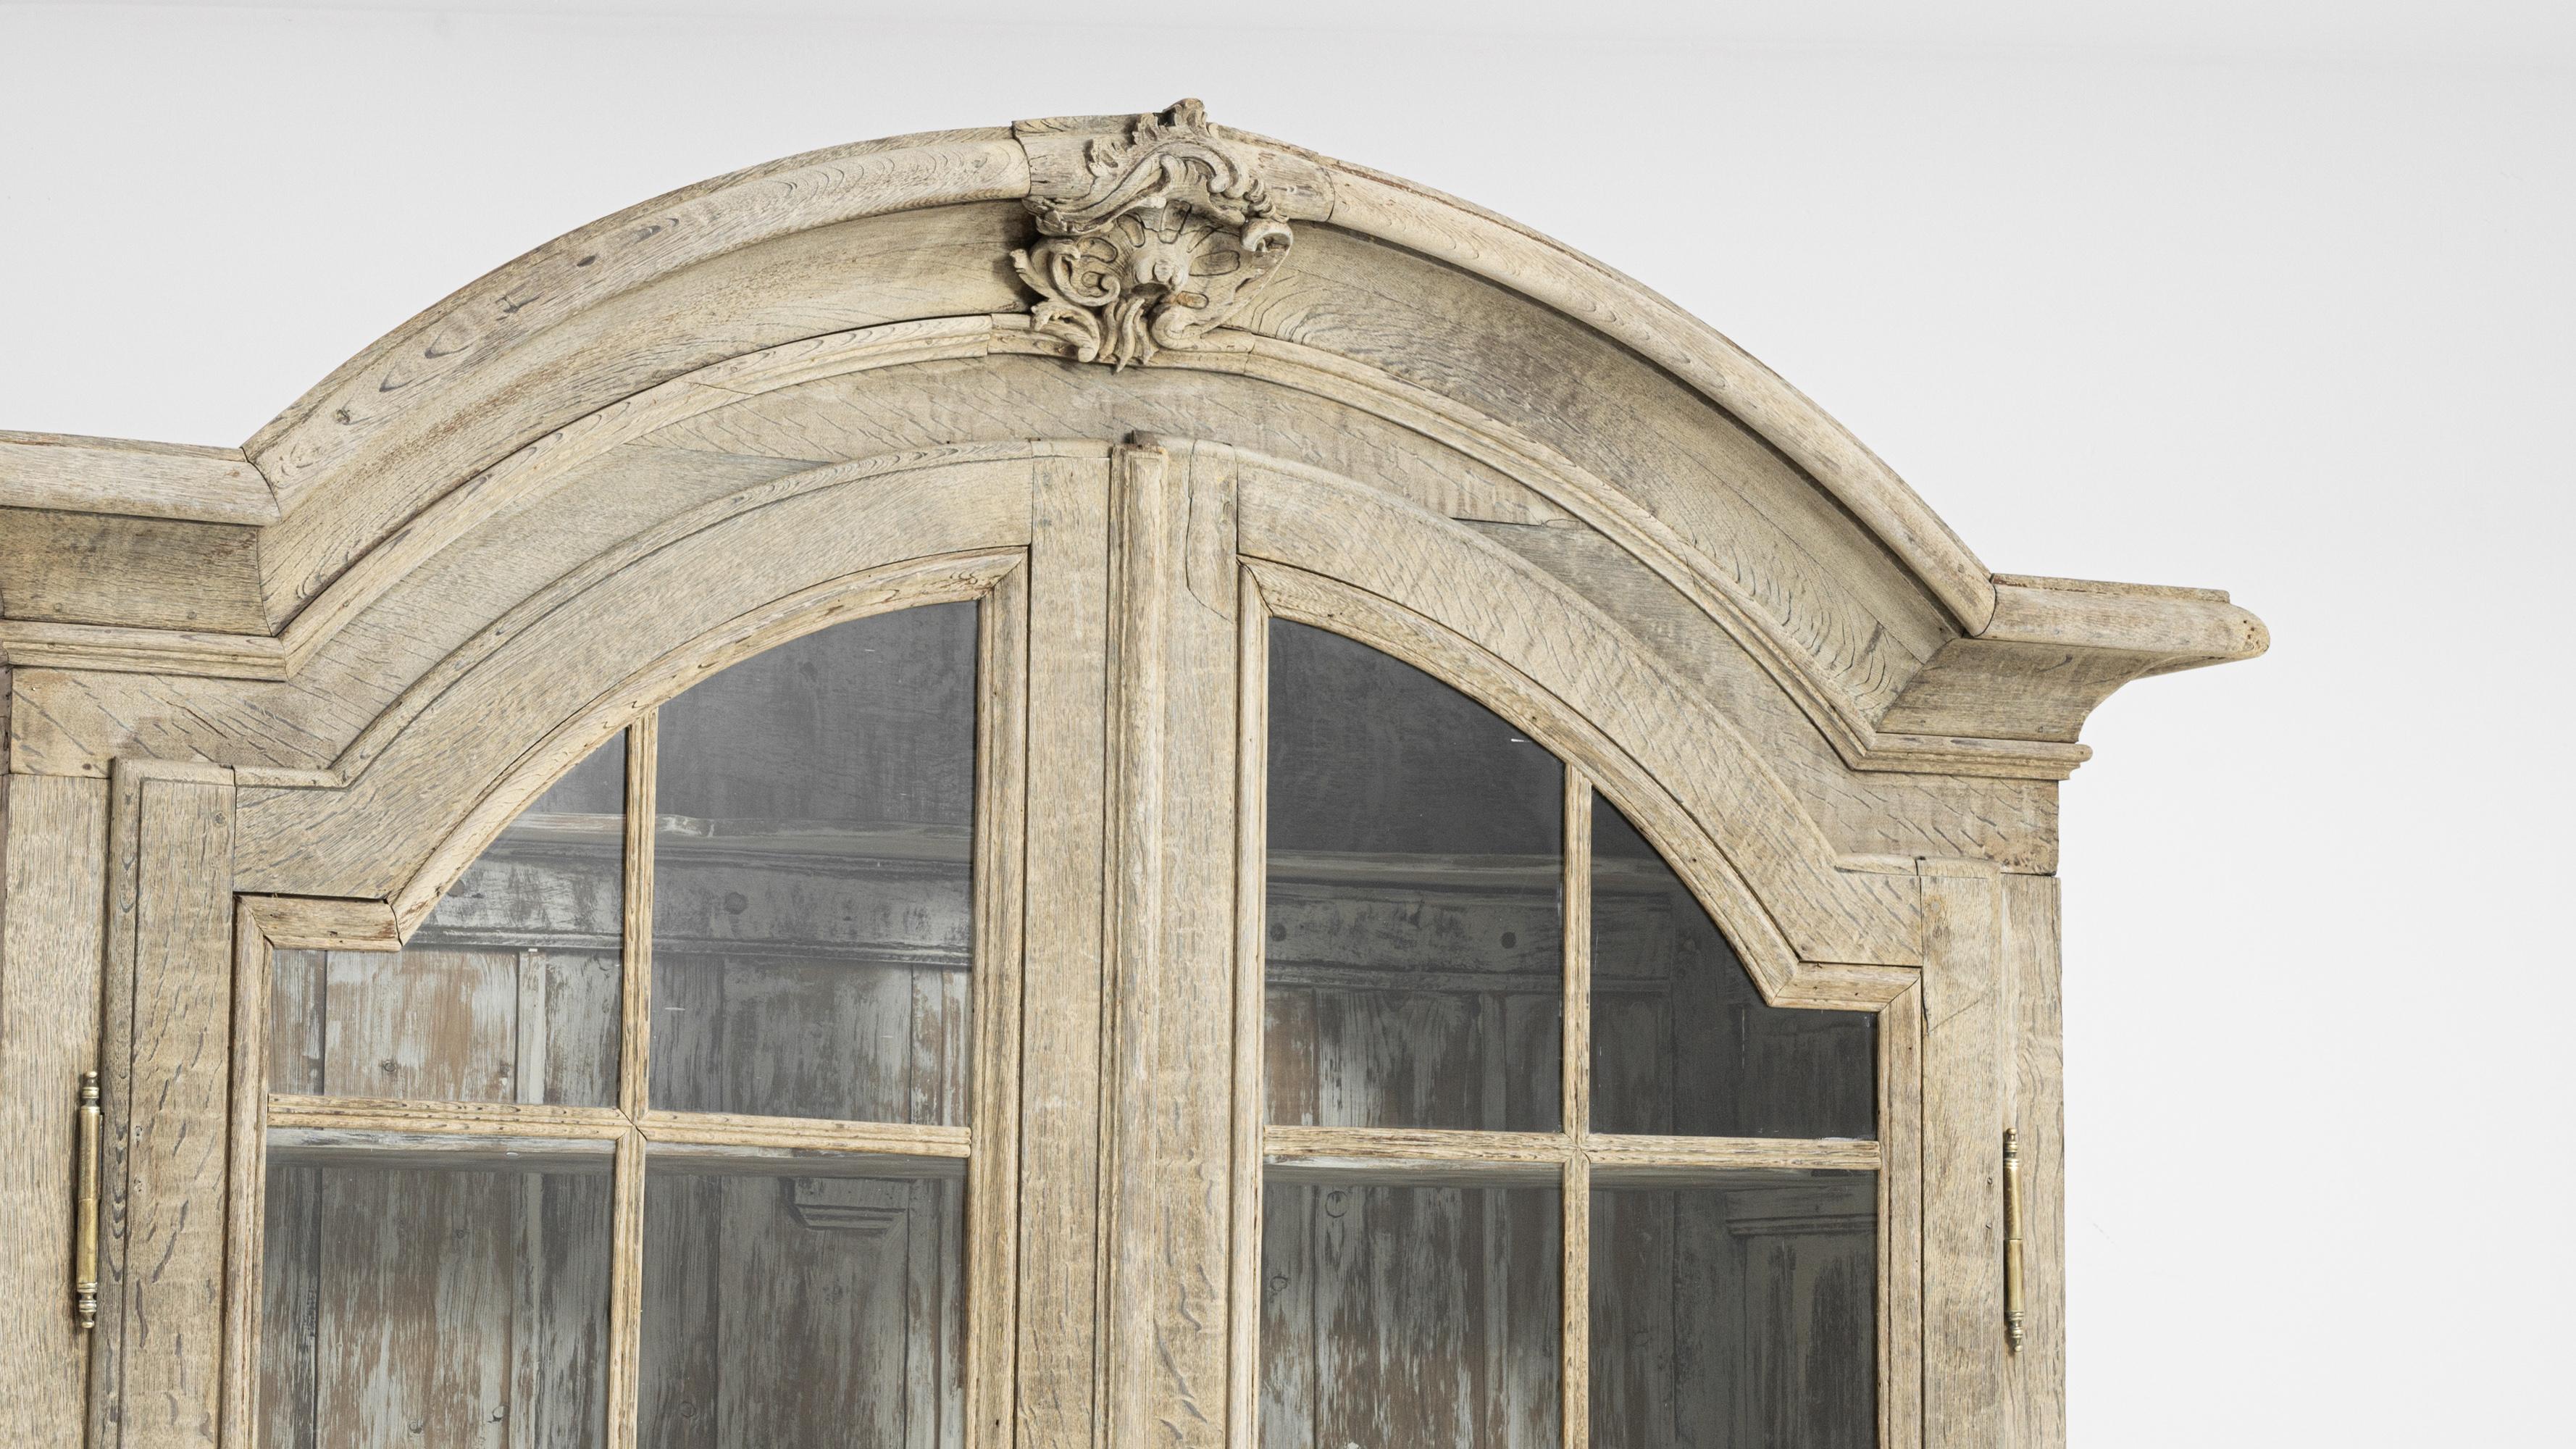 The natural finish of this majestic oak vitrine evokes a view across sand-dunes to the Mediterranean. Built in France, circa 1800, a carved flourish crowns the broad arch of the case — its windswept, sinuous form adds an organic accent to the